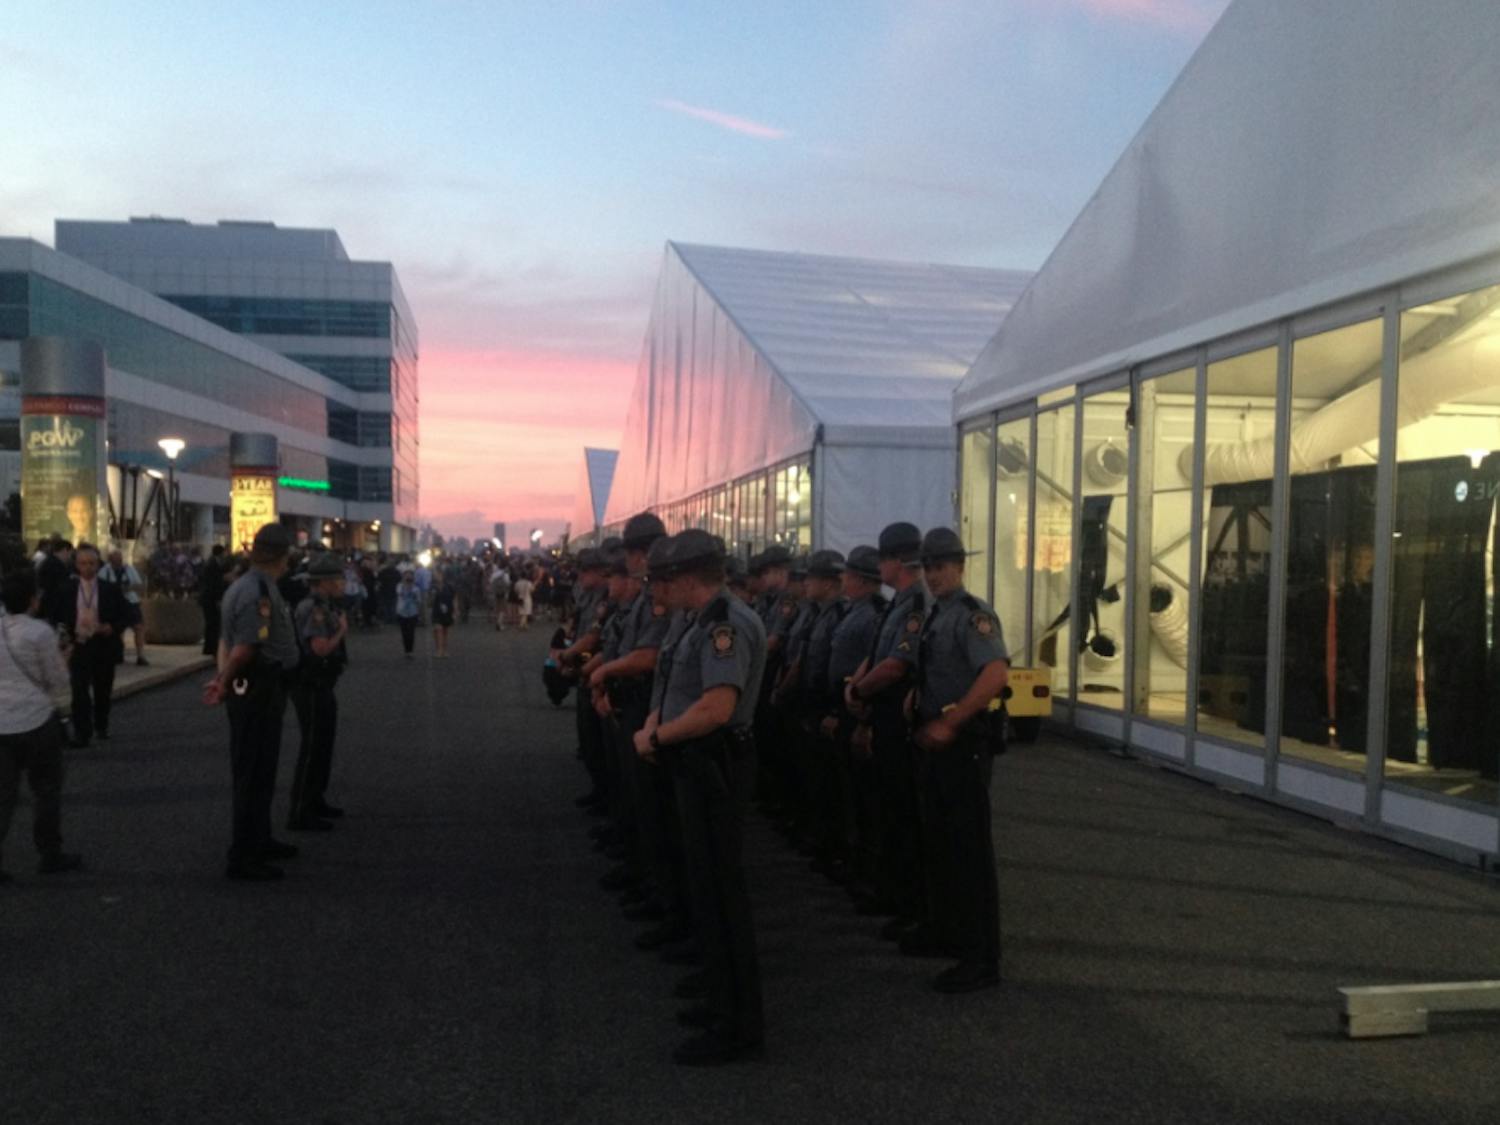 Policemen stand guard outside the media center after protests dispersed at the Democratic National Convention in Philadelphia on July 26, 2016.